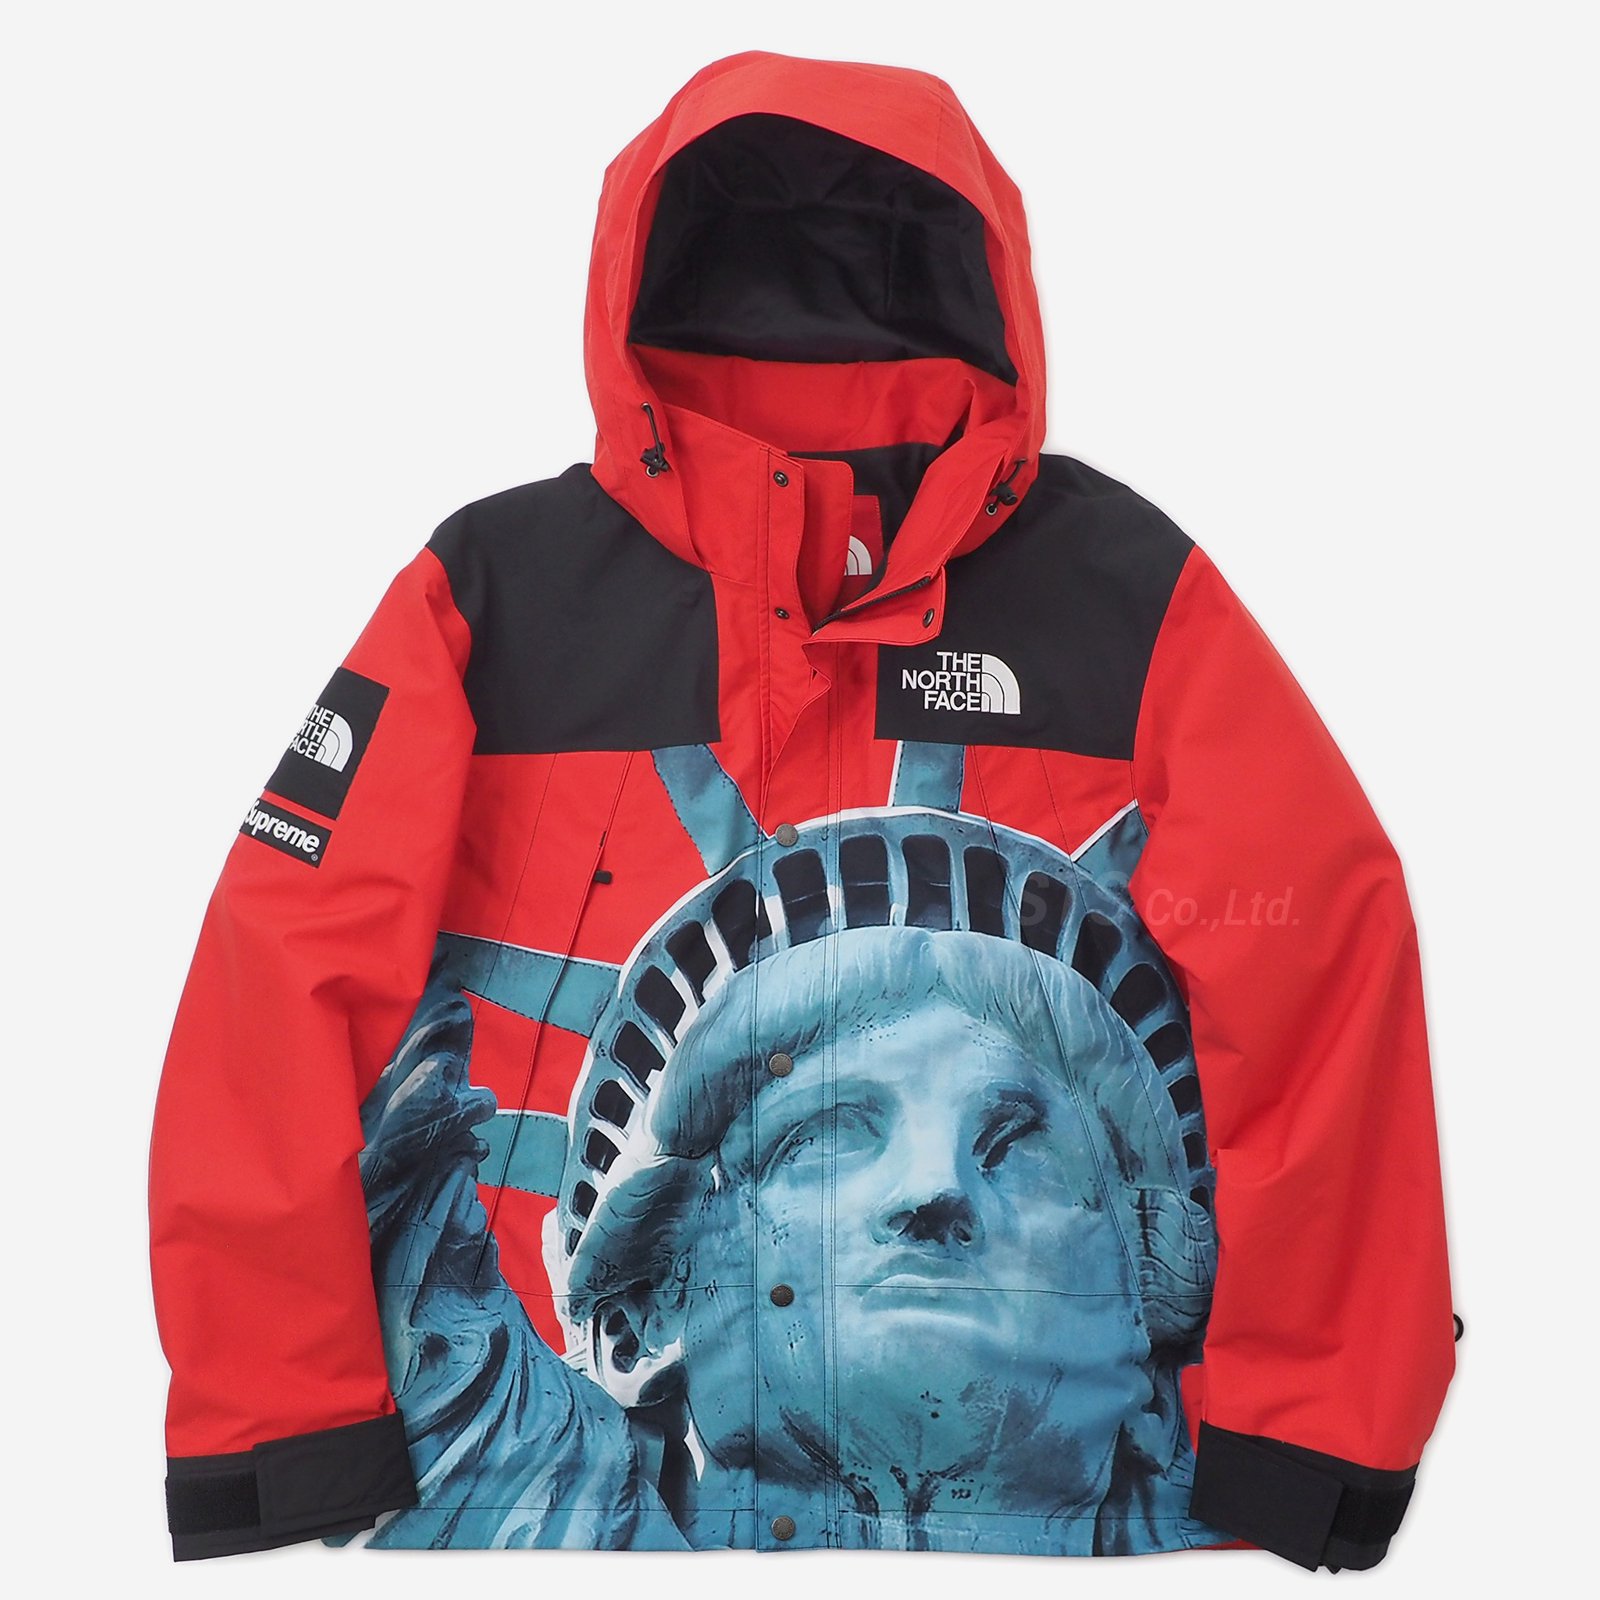 Supreme/The North Face Statue of Liberty Mountain Jacket - UG